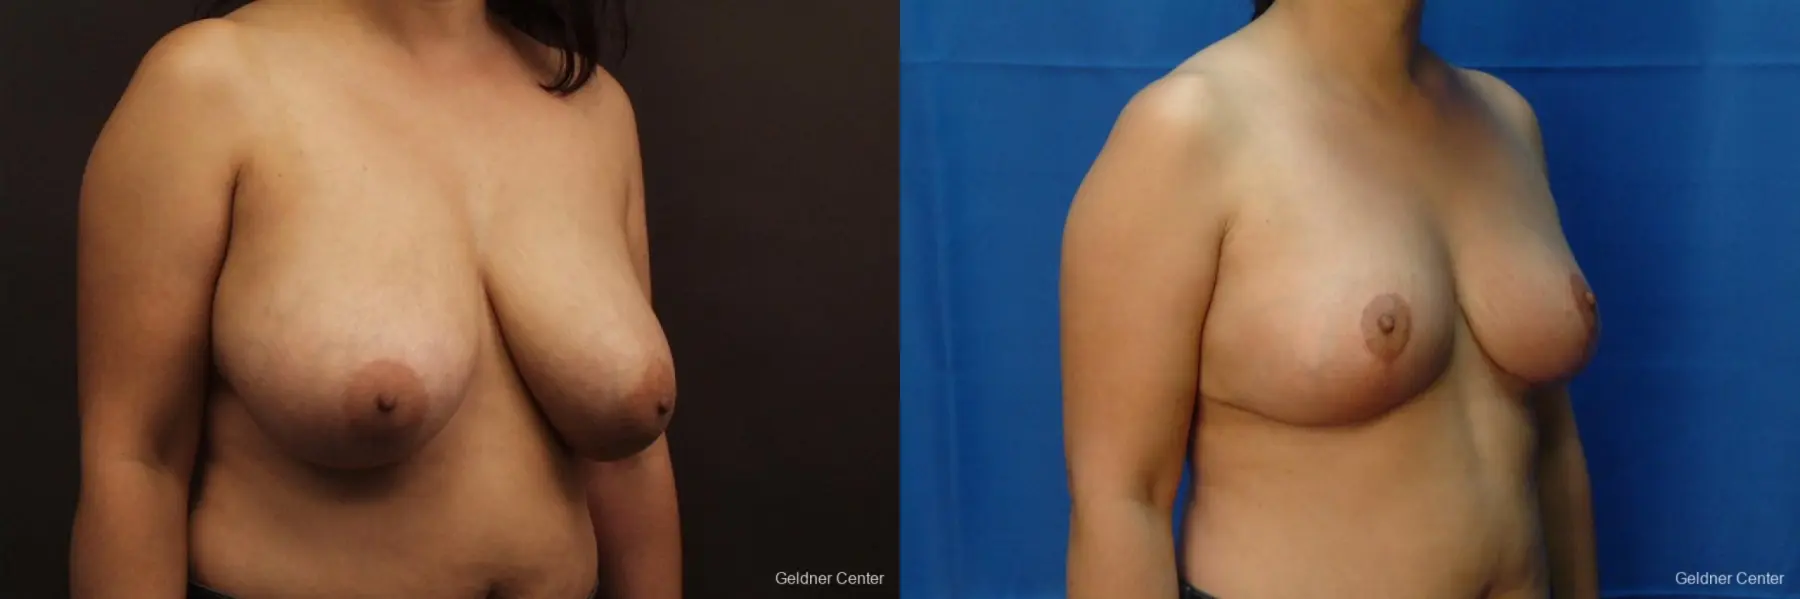 Chicago Breast Reduction 2416 - Before and After 3